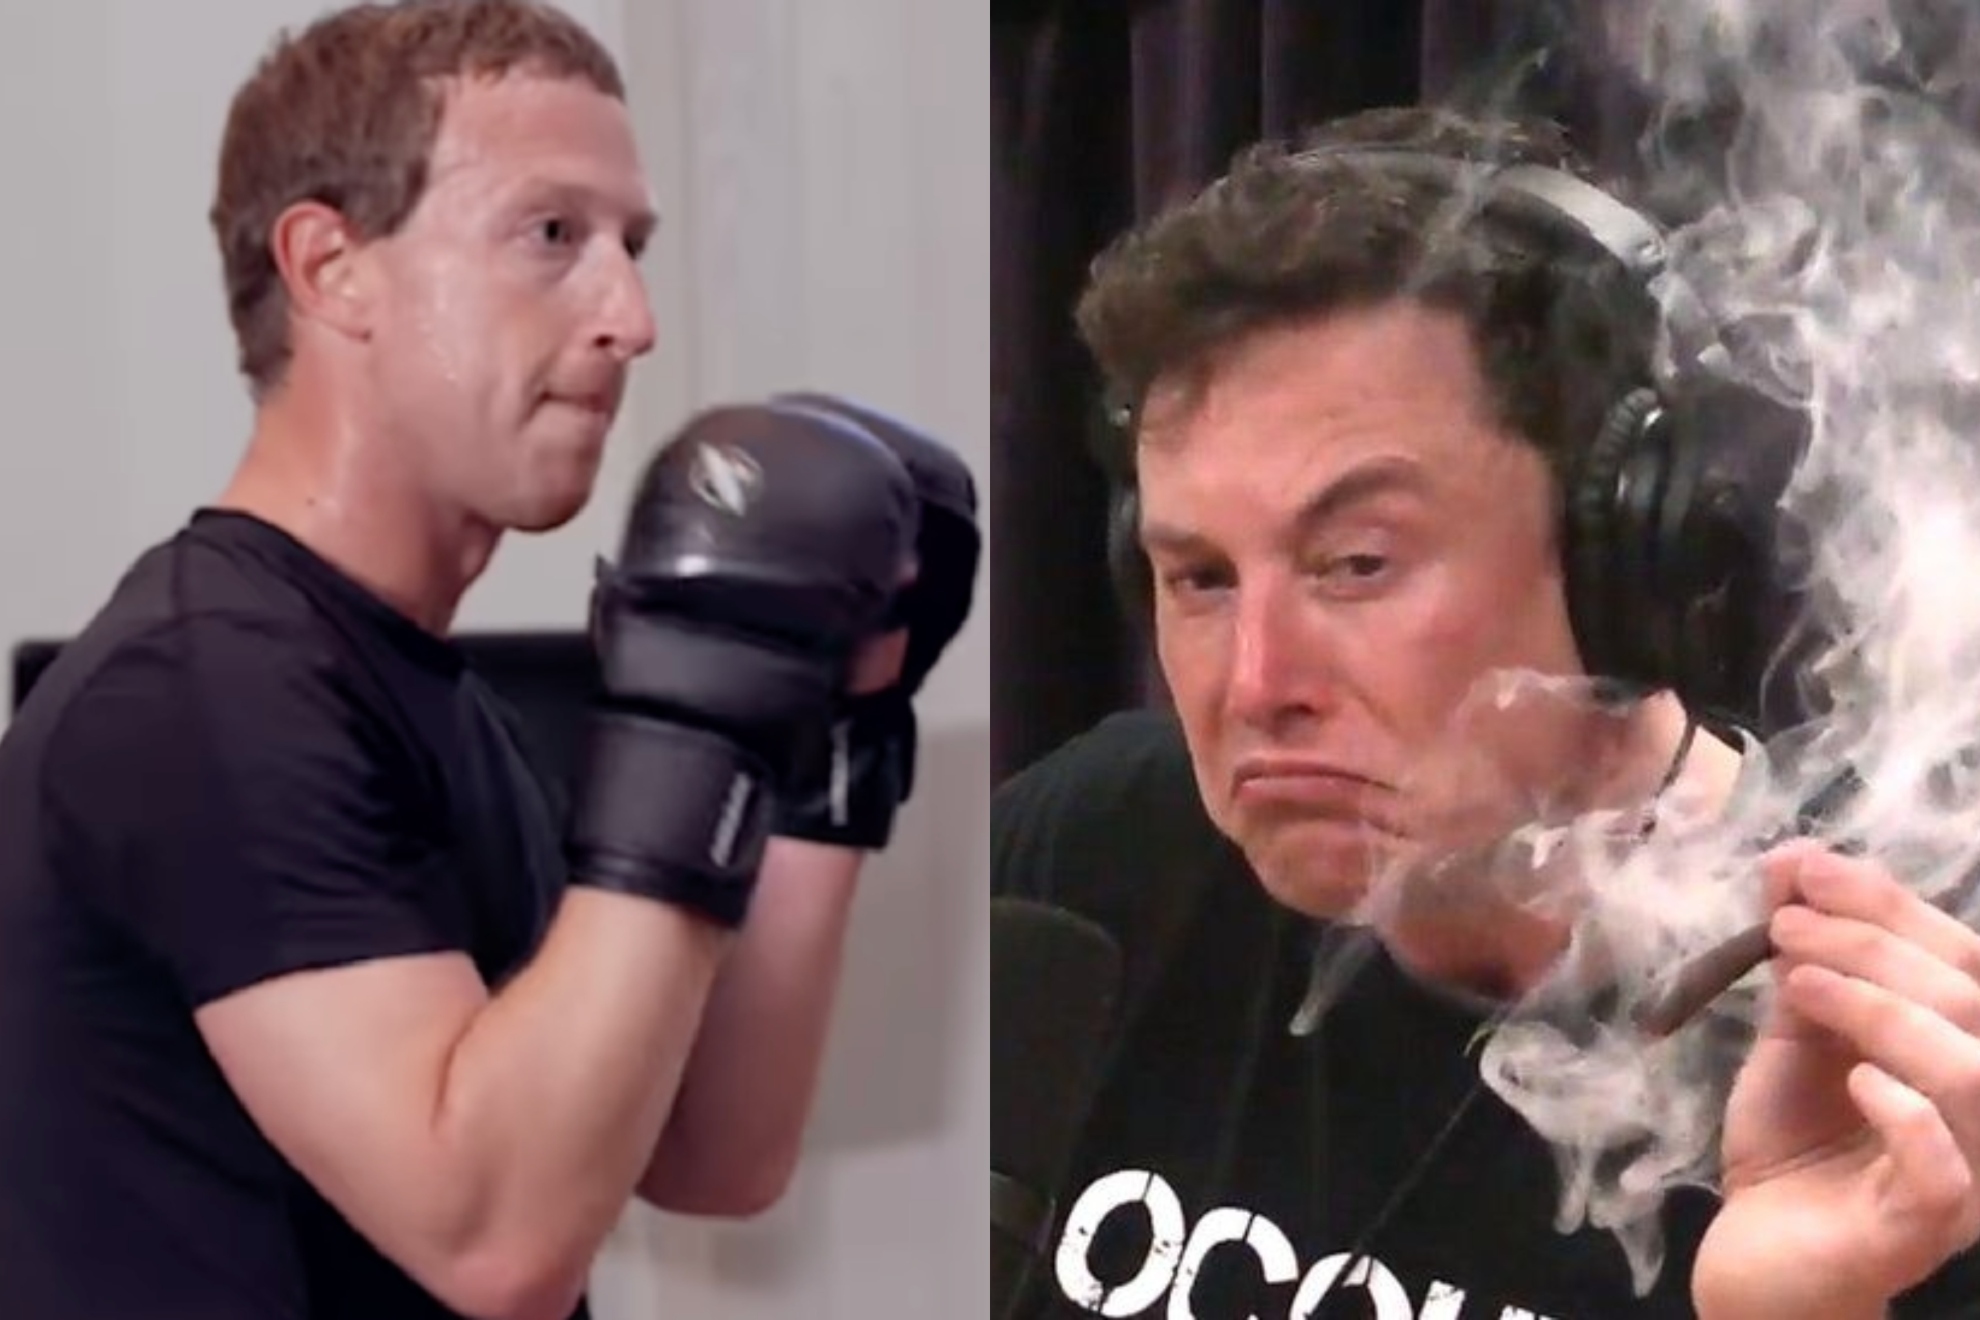 Elon Musk and Mark Zuckerberg's virtual feud intensifies, paving the way for a high-stakes physical showdown